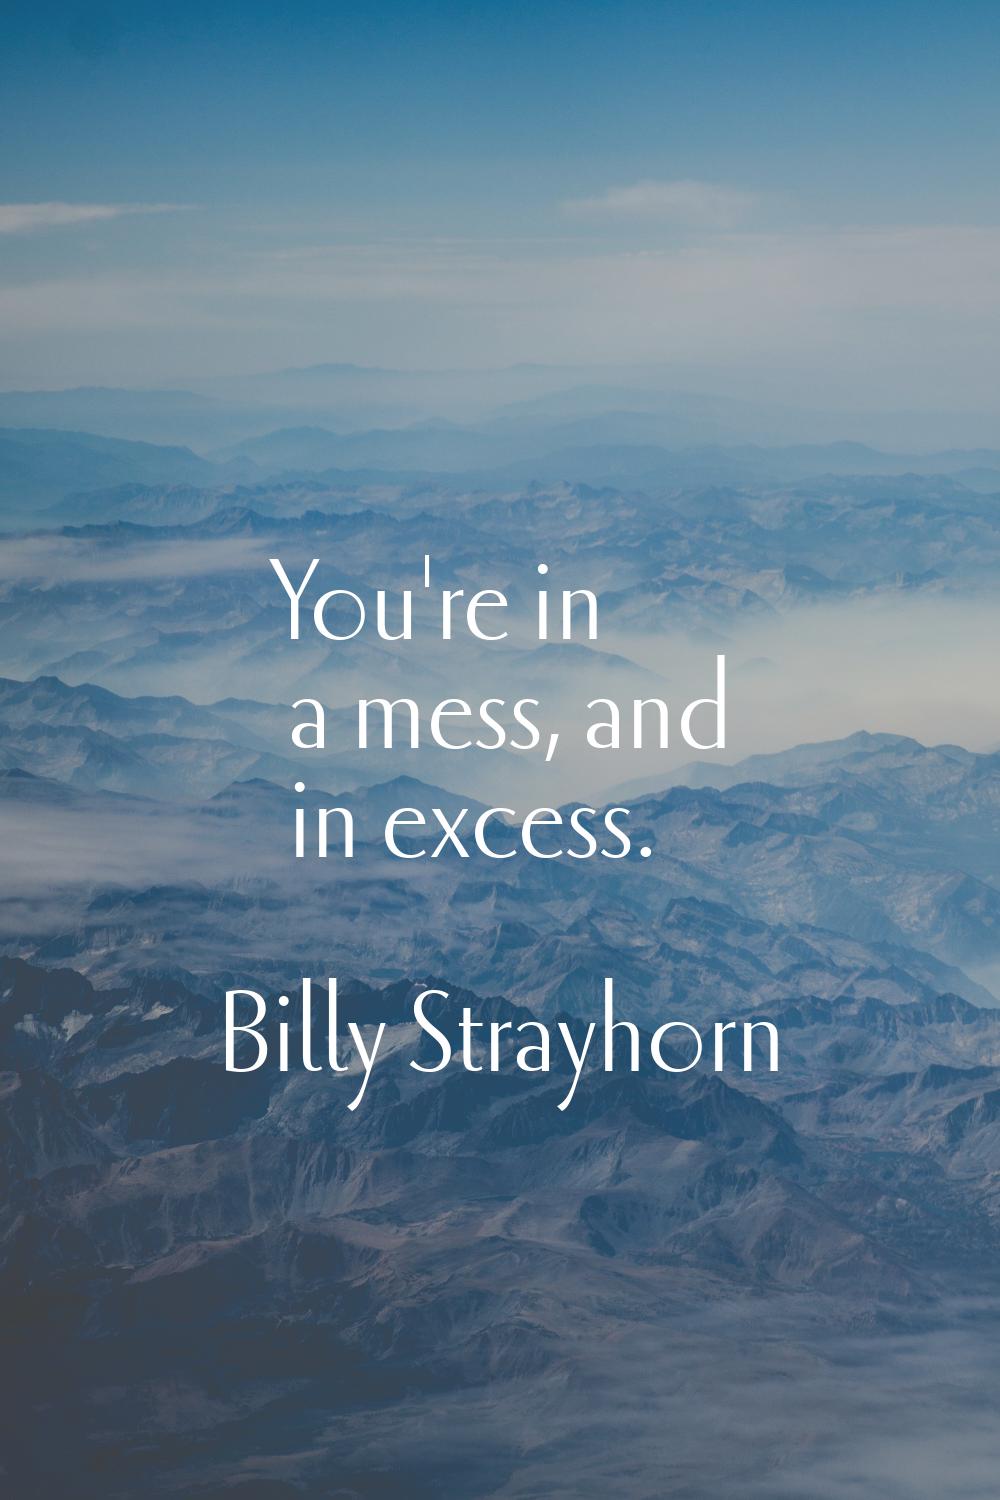 You're in a mess, and in excess.